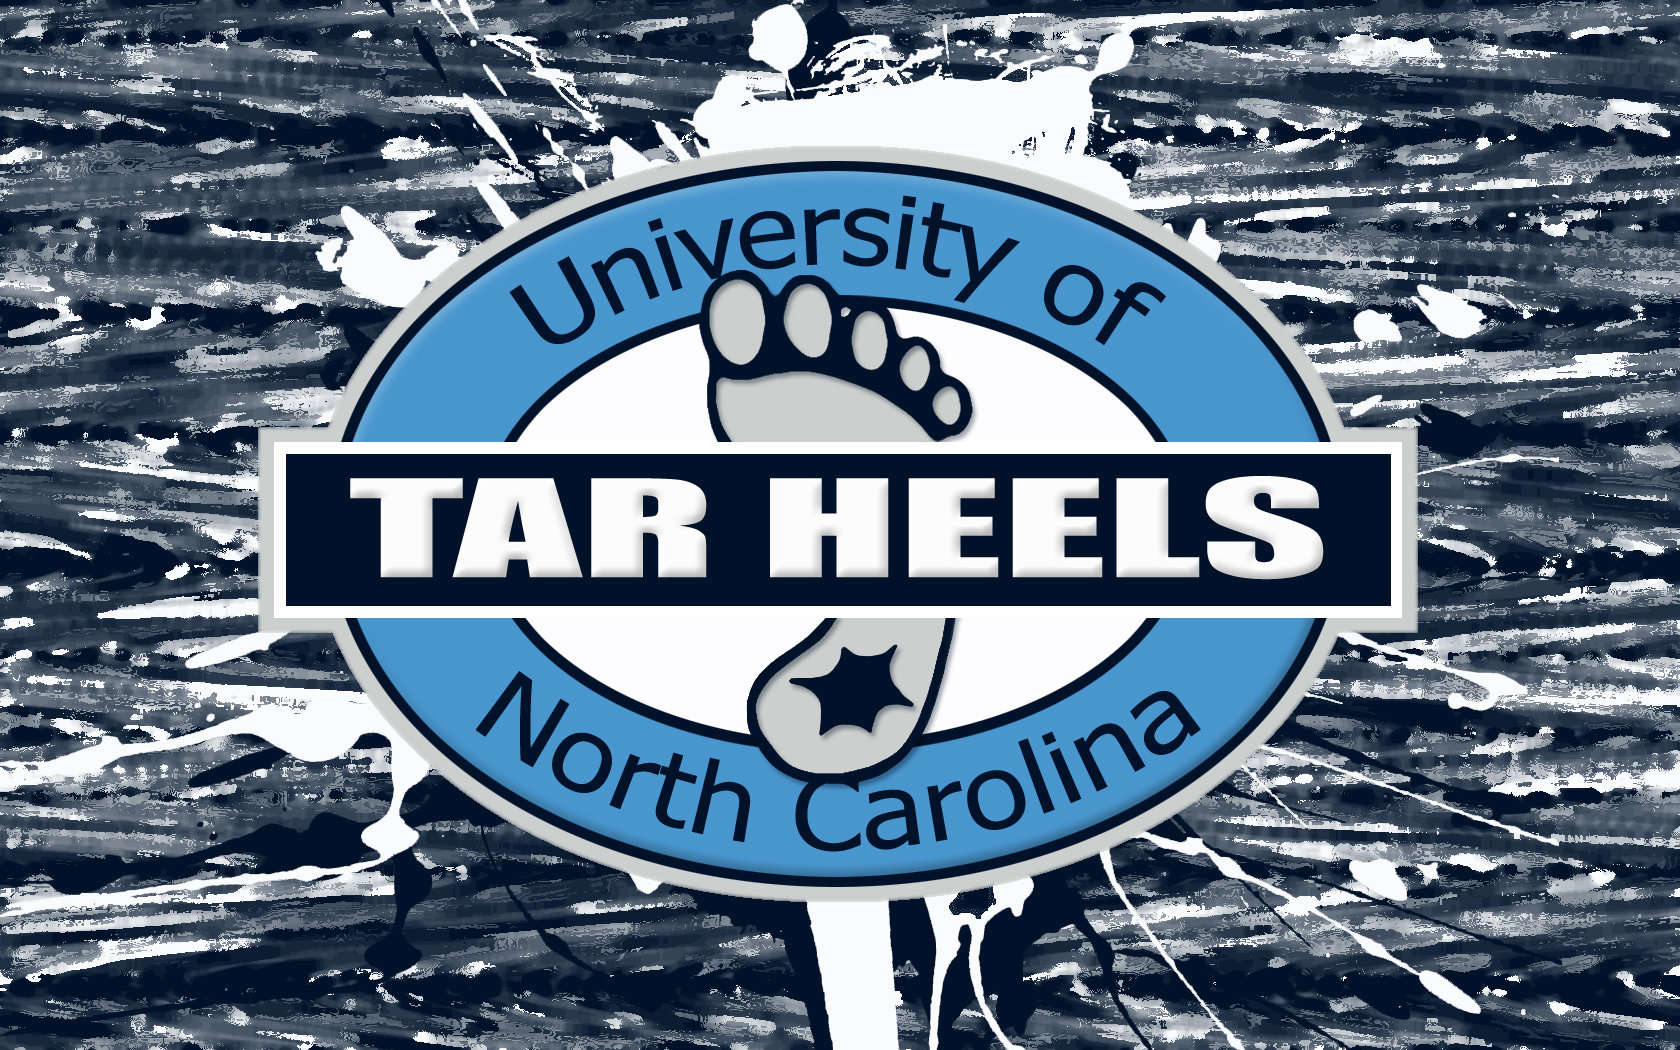 UNC by Schultzy0023 on